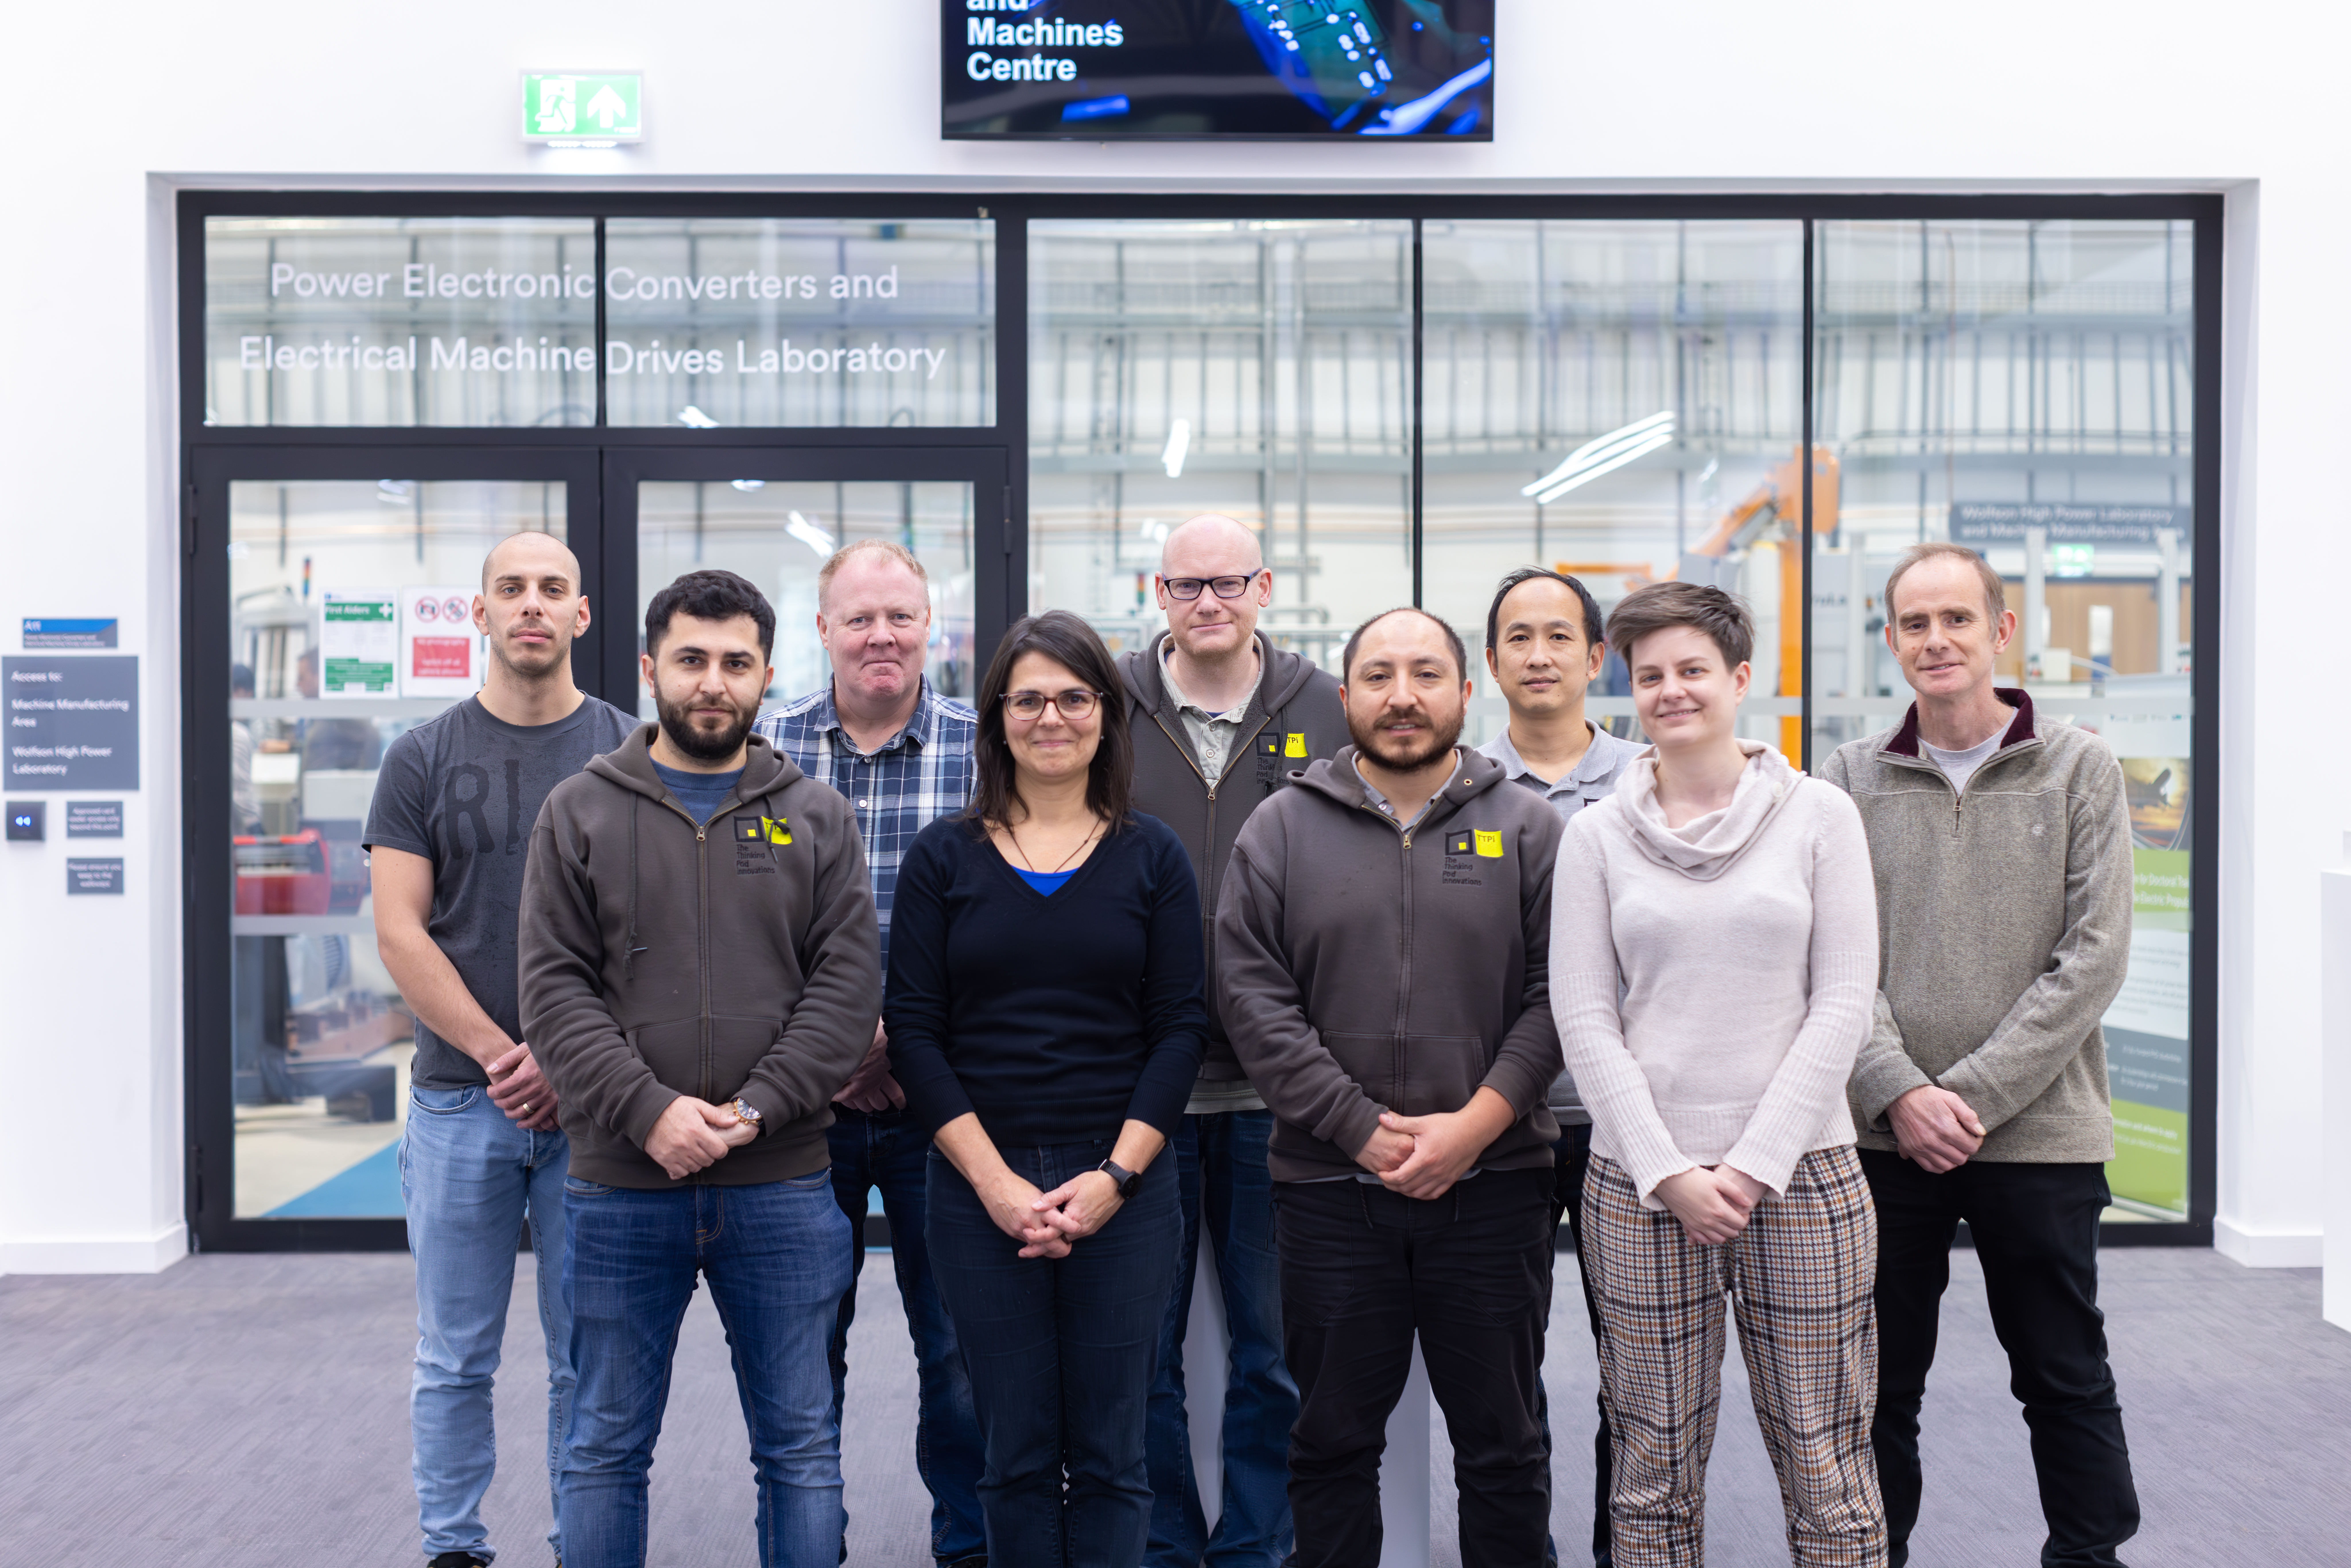 Dr Liliana de Lillo, Power Electronics, Machines and Control Research Group, and her team